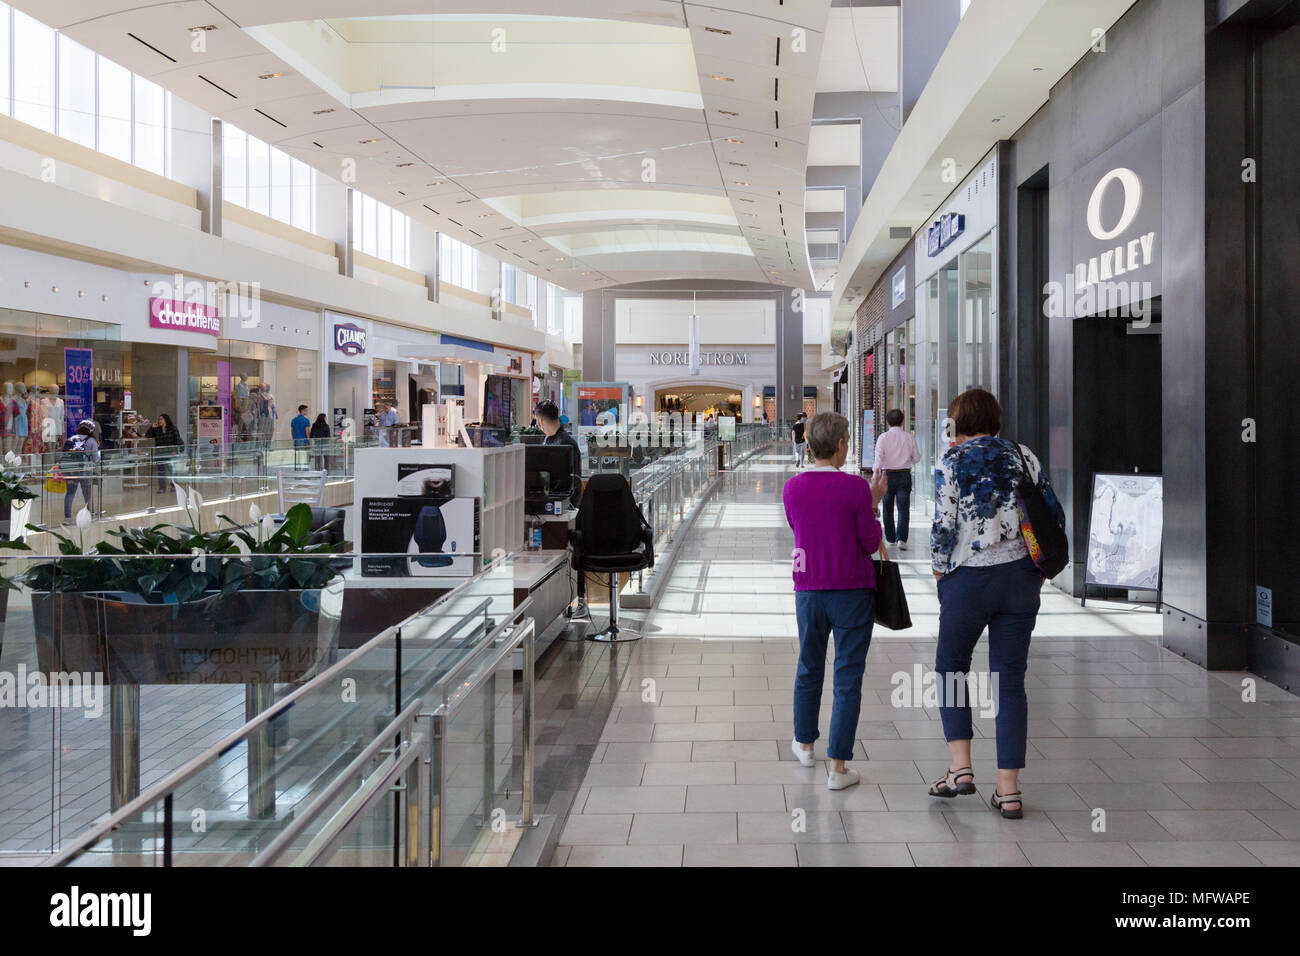 People shopping in the Galleria Shopping Mall, or Houston Galleria, The Galleria, Houston Texas USA Stock Photo